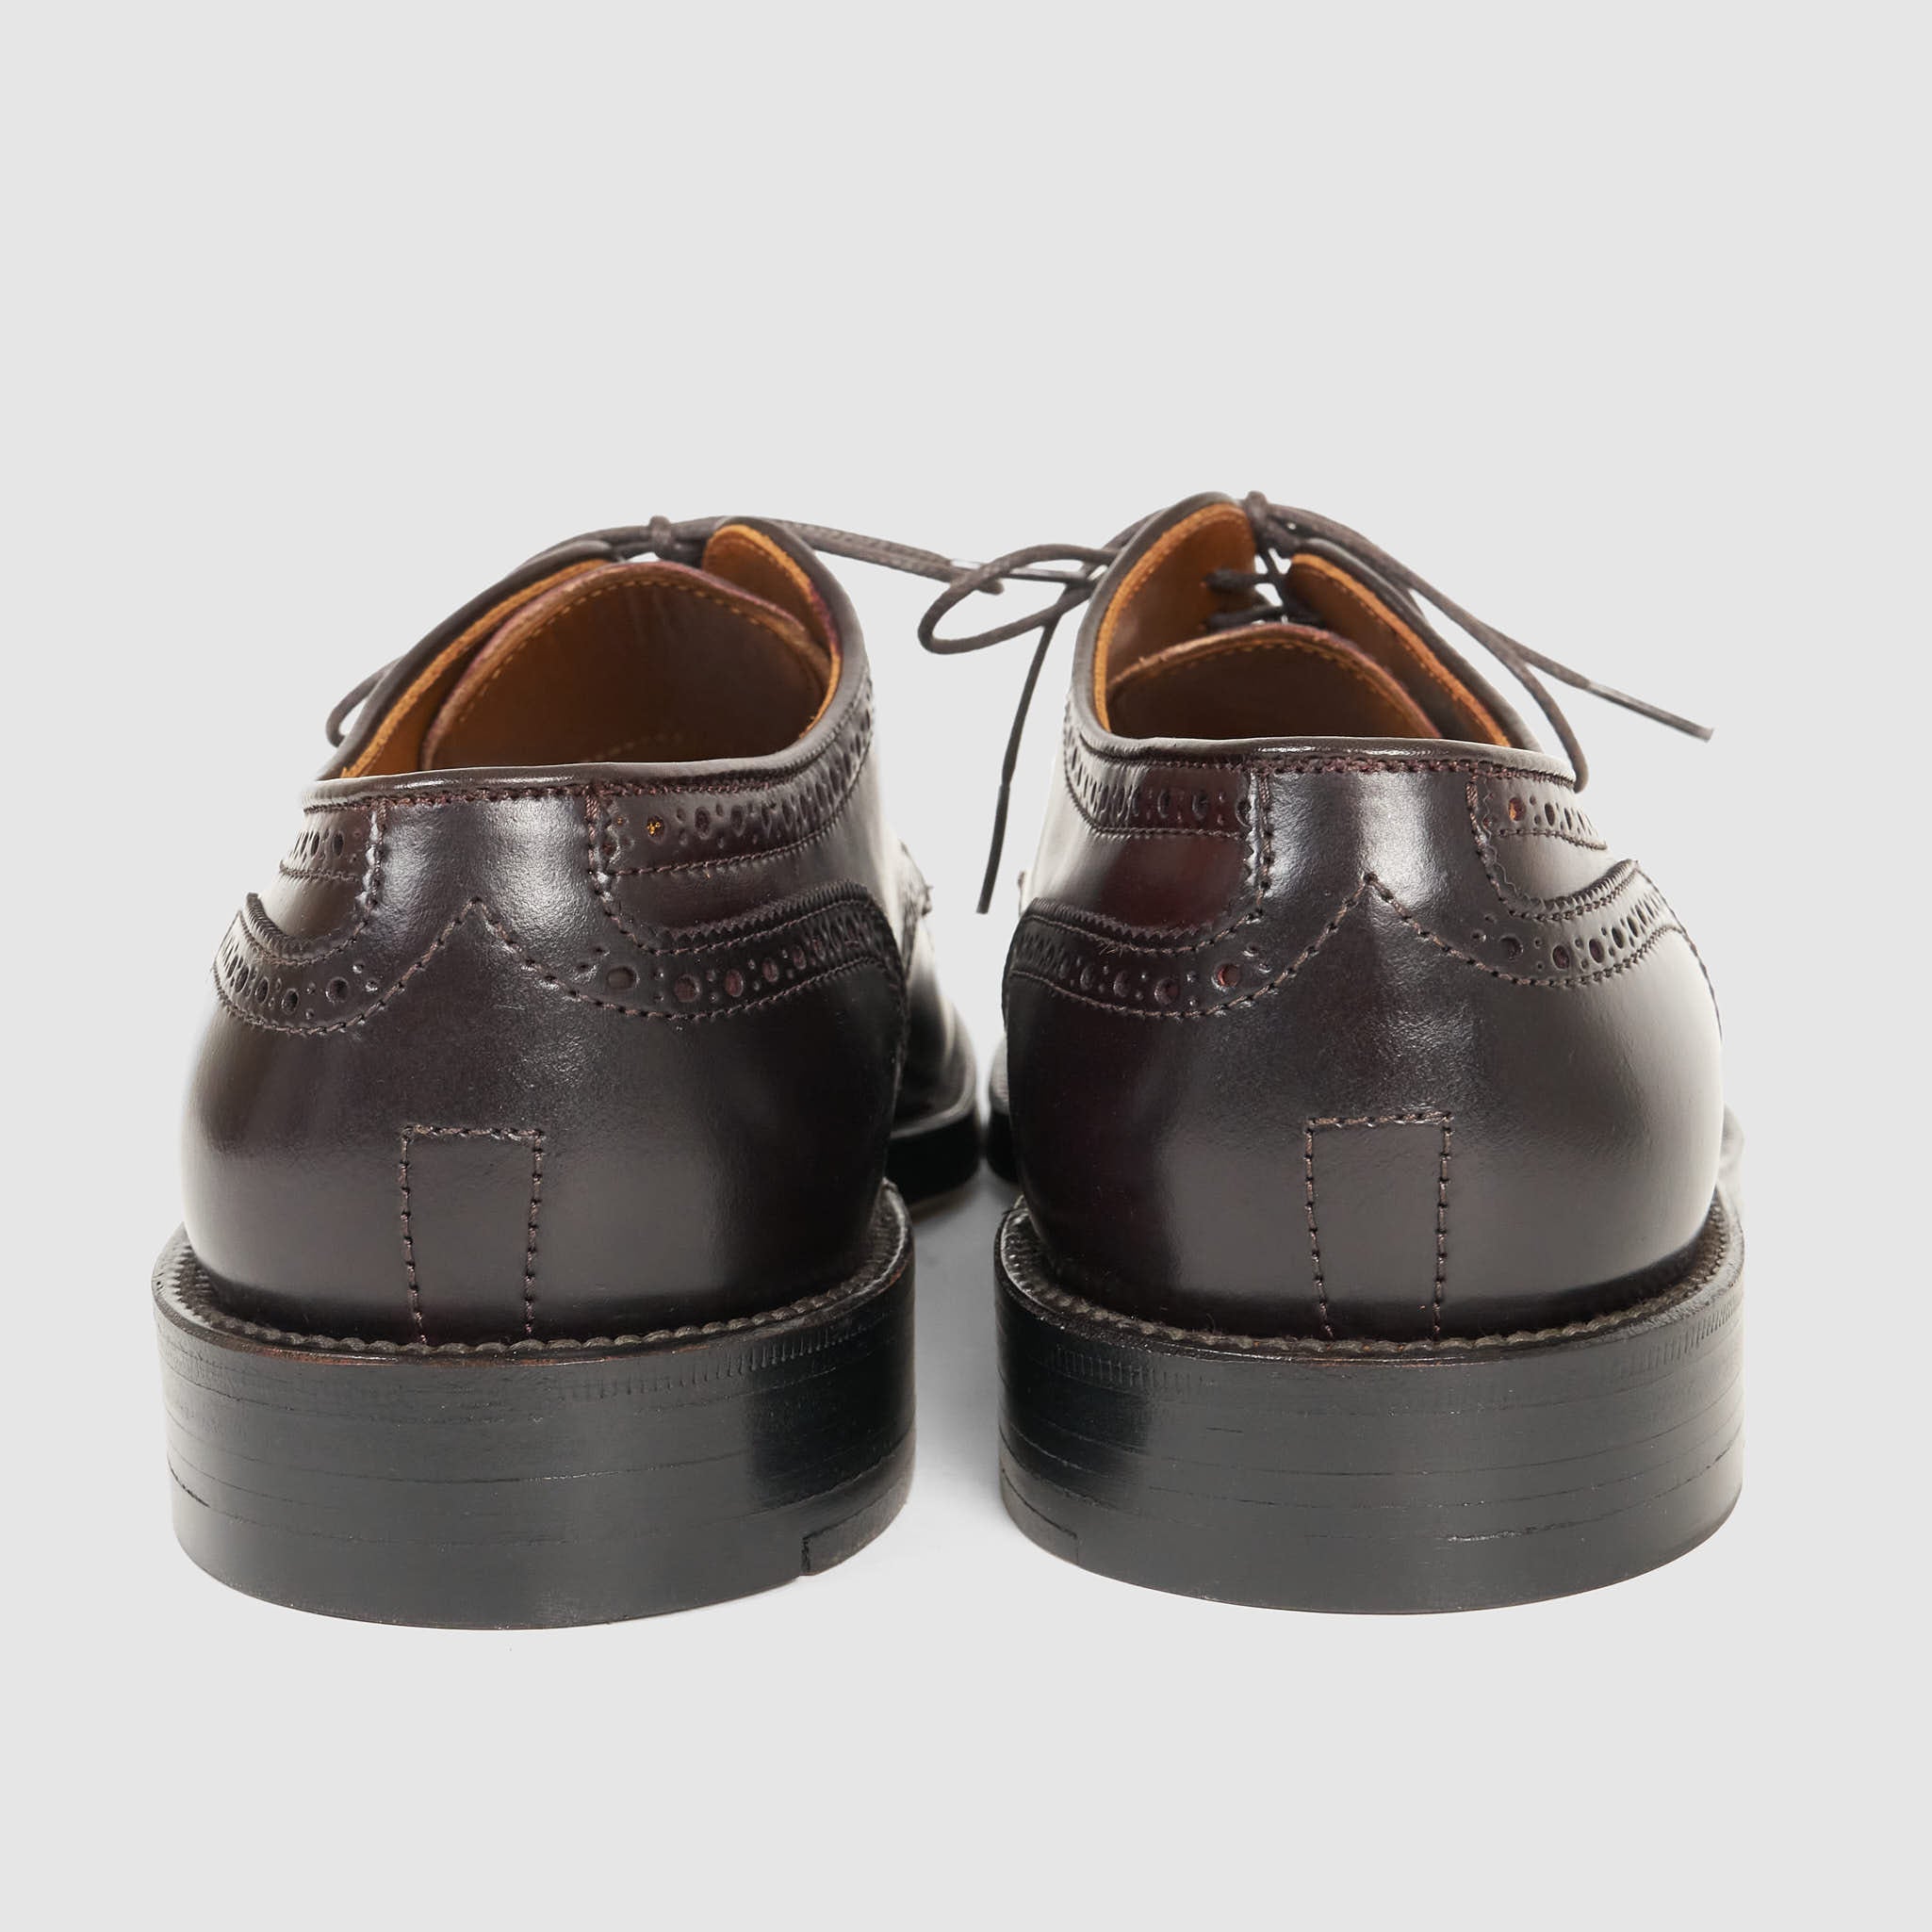 Alden Shoes Oxford Brogue 2145 Leather Shoes - DeeCee style